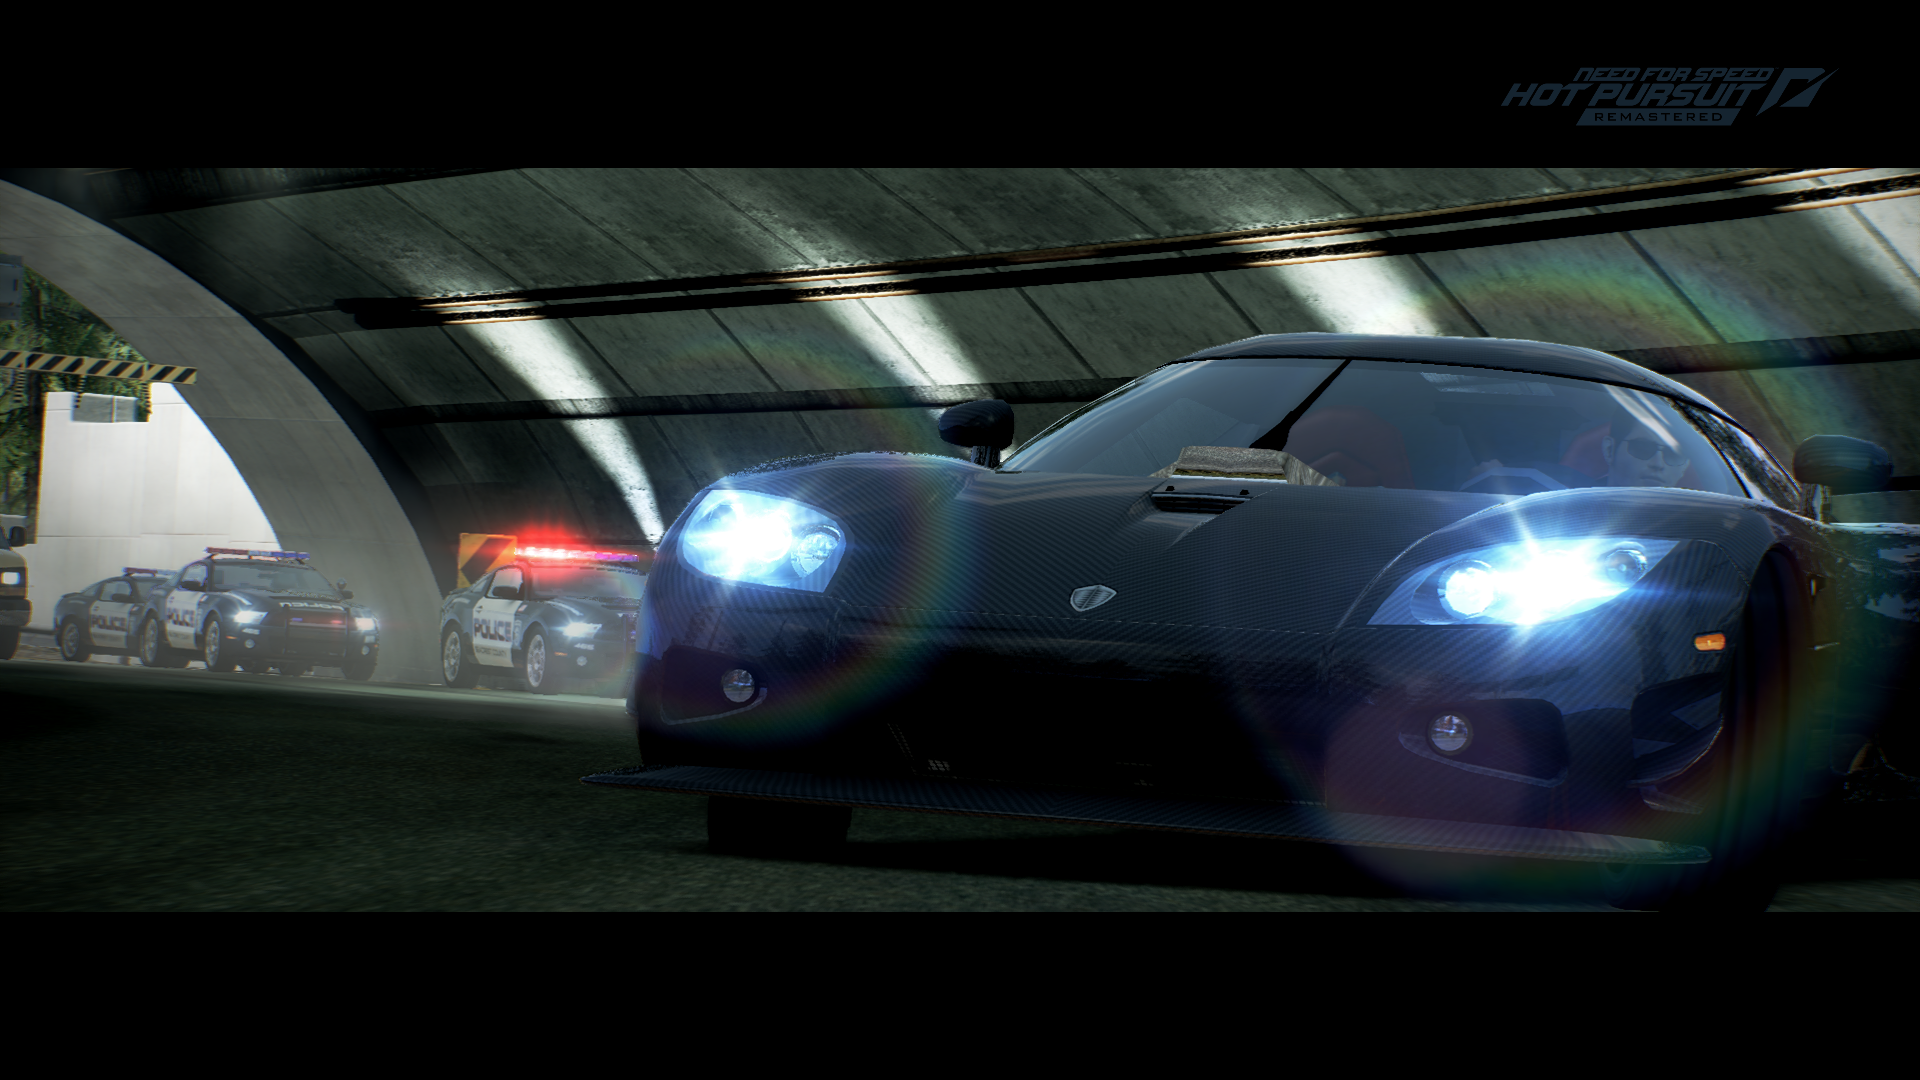 need for speed hot pursuit remastered car customization